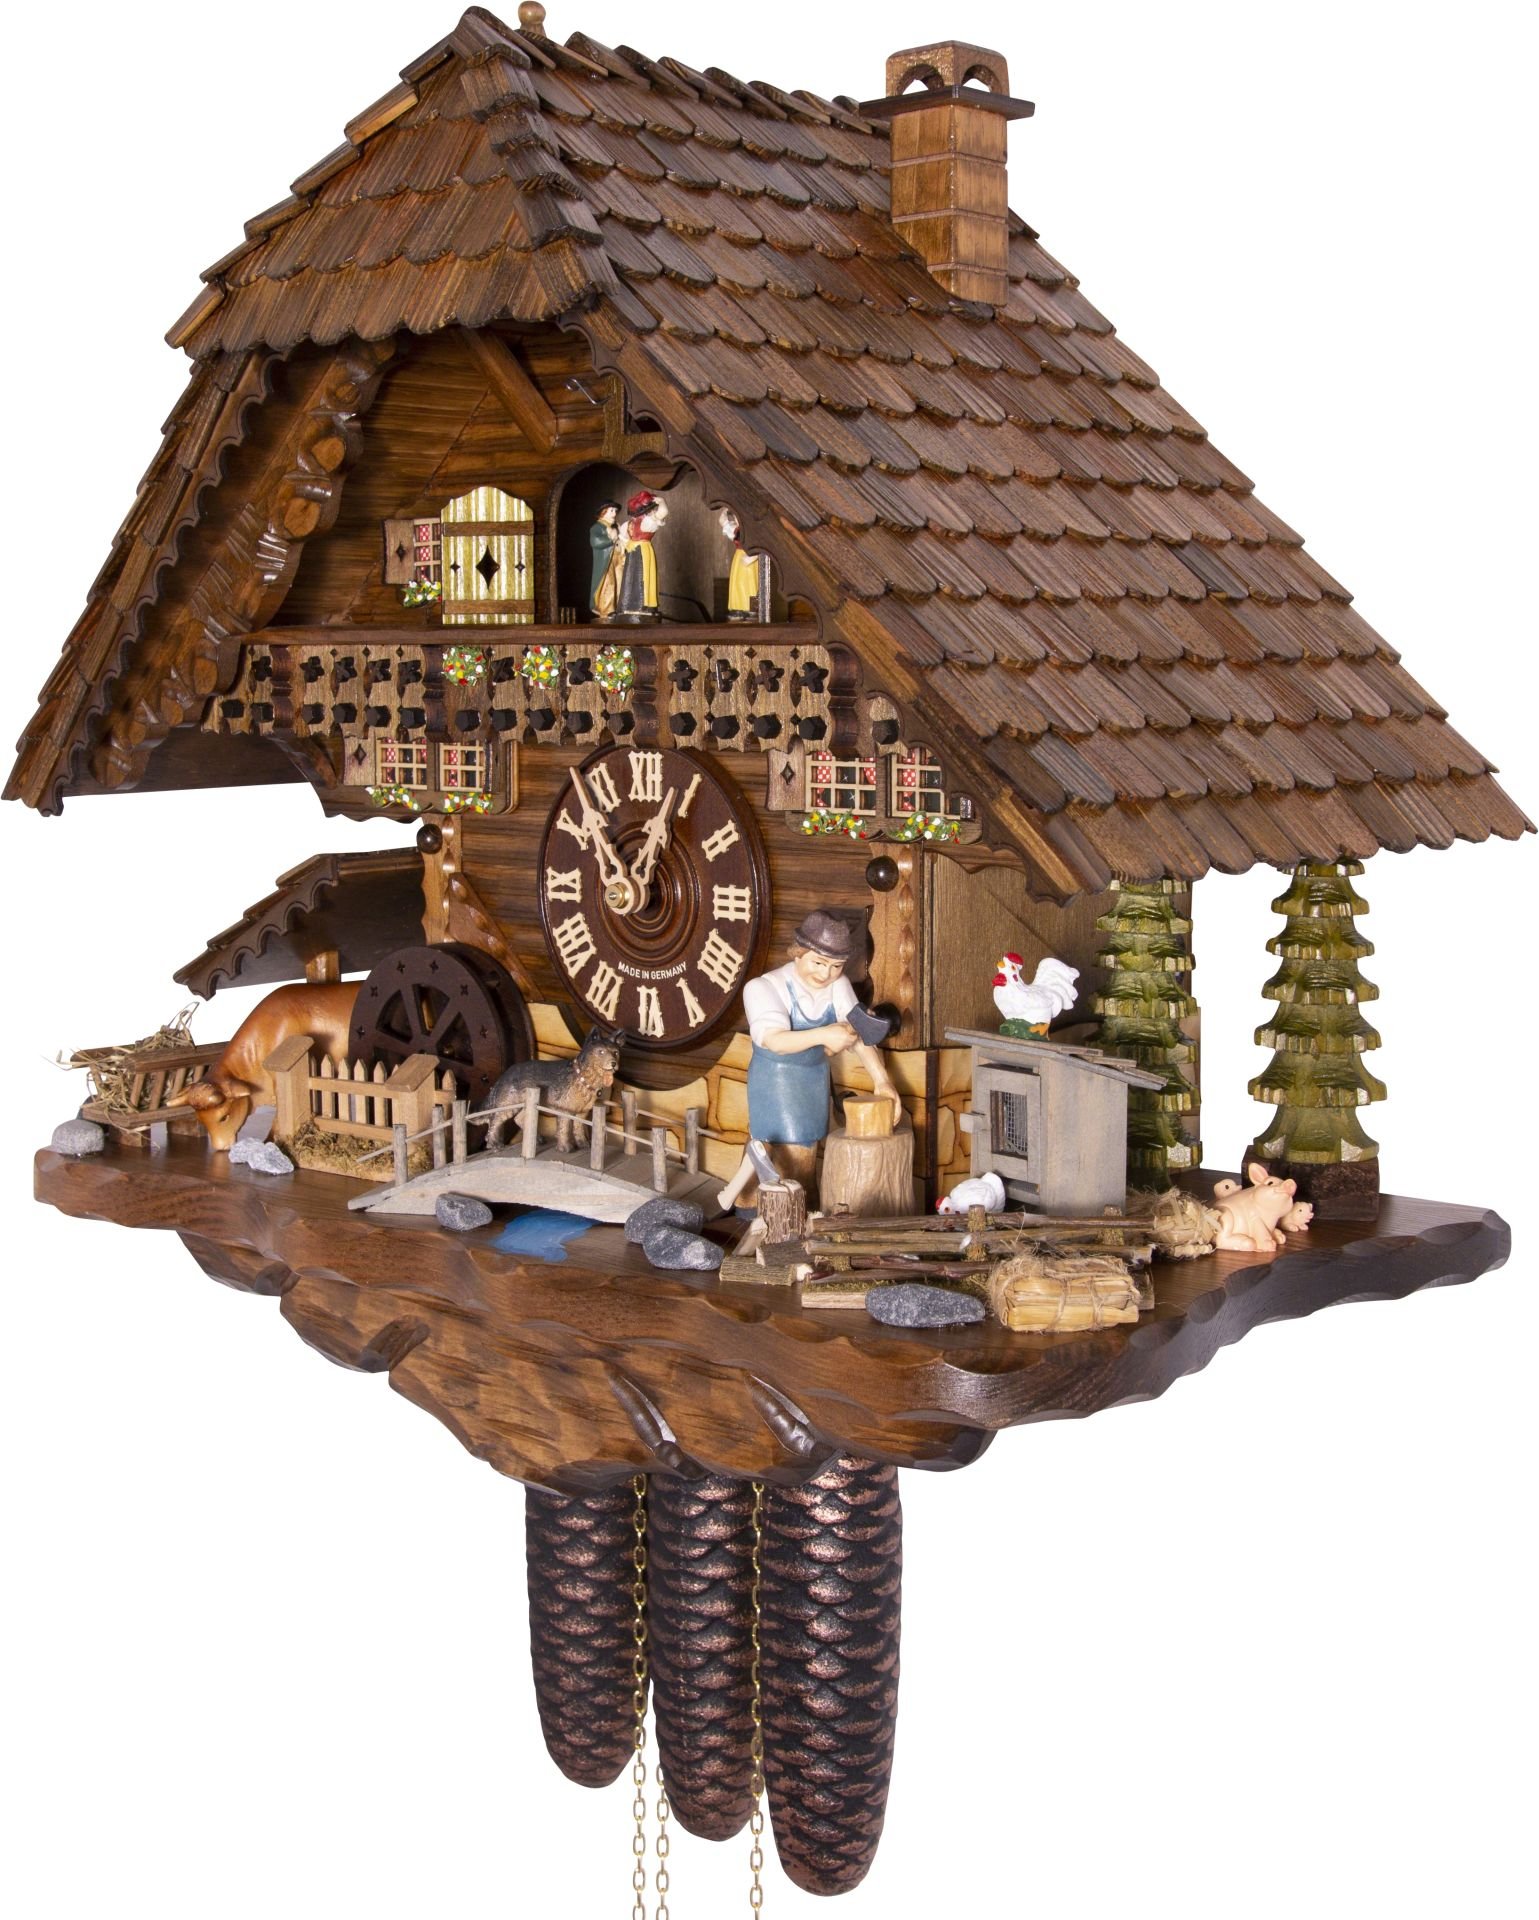 Cuckoo Clock Chalet Style 8 Day Movement 46cm by Hekas